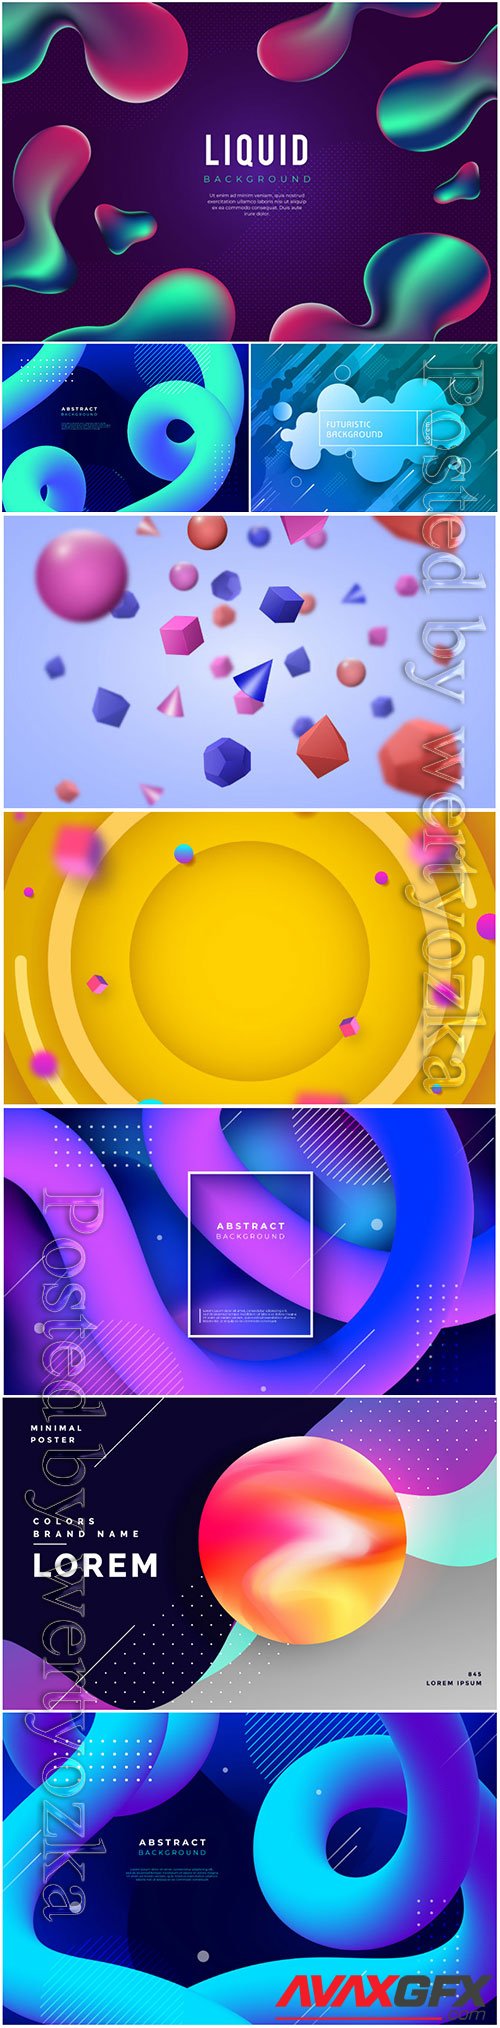 Abstract vector background with liquid shapes, 3d models template